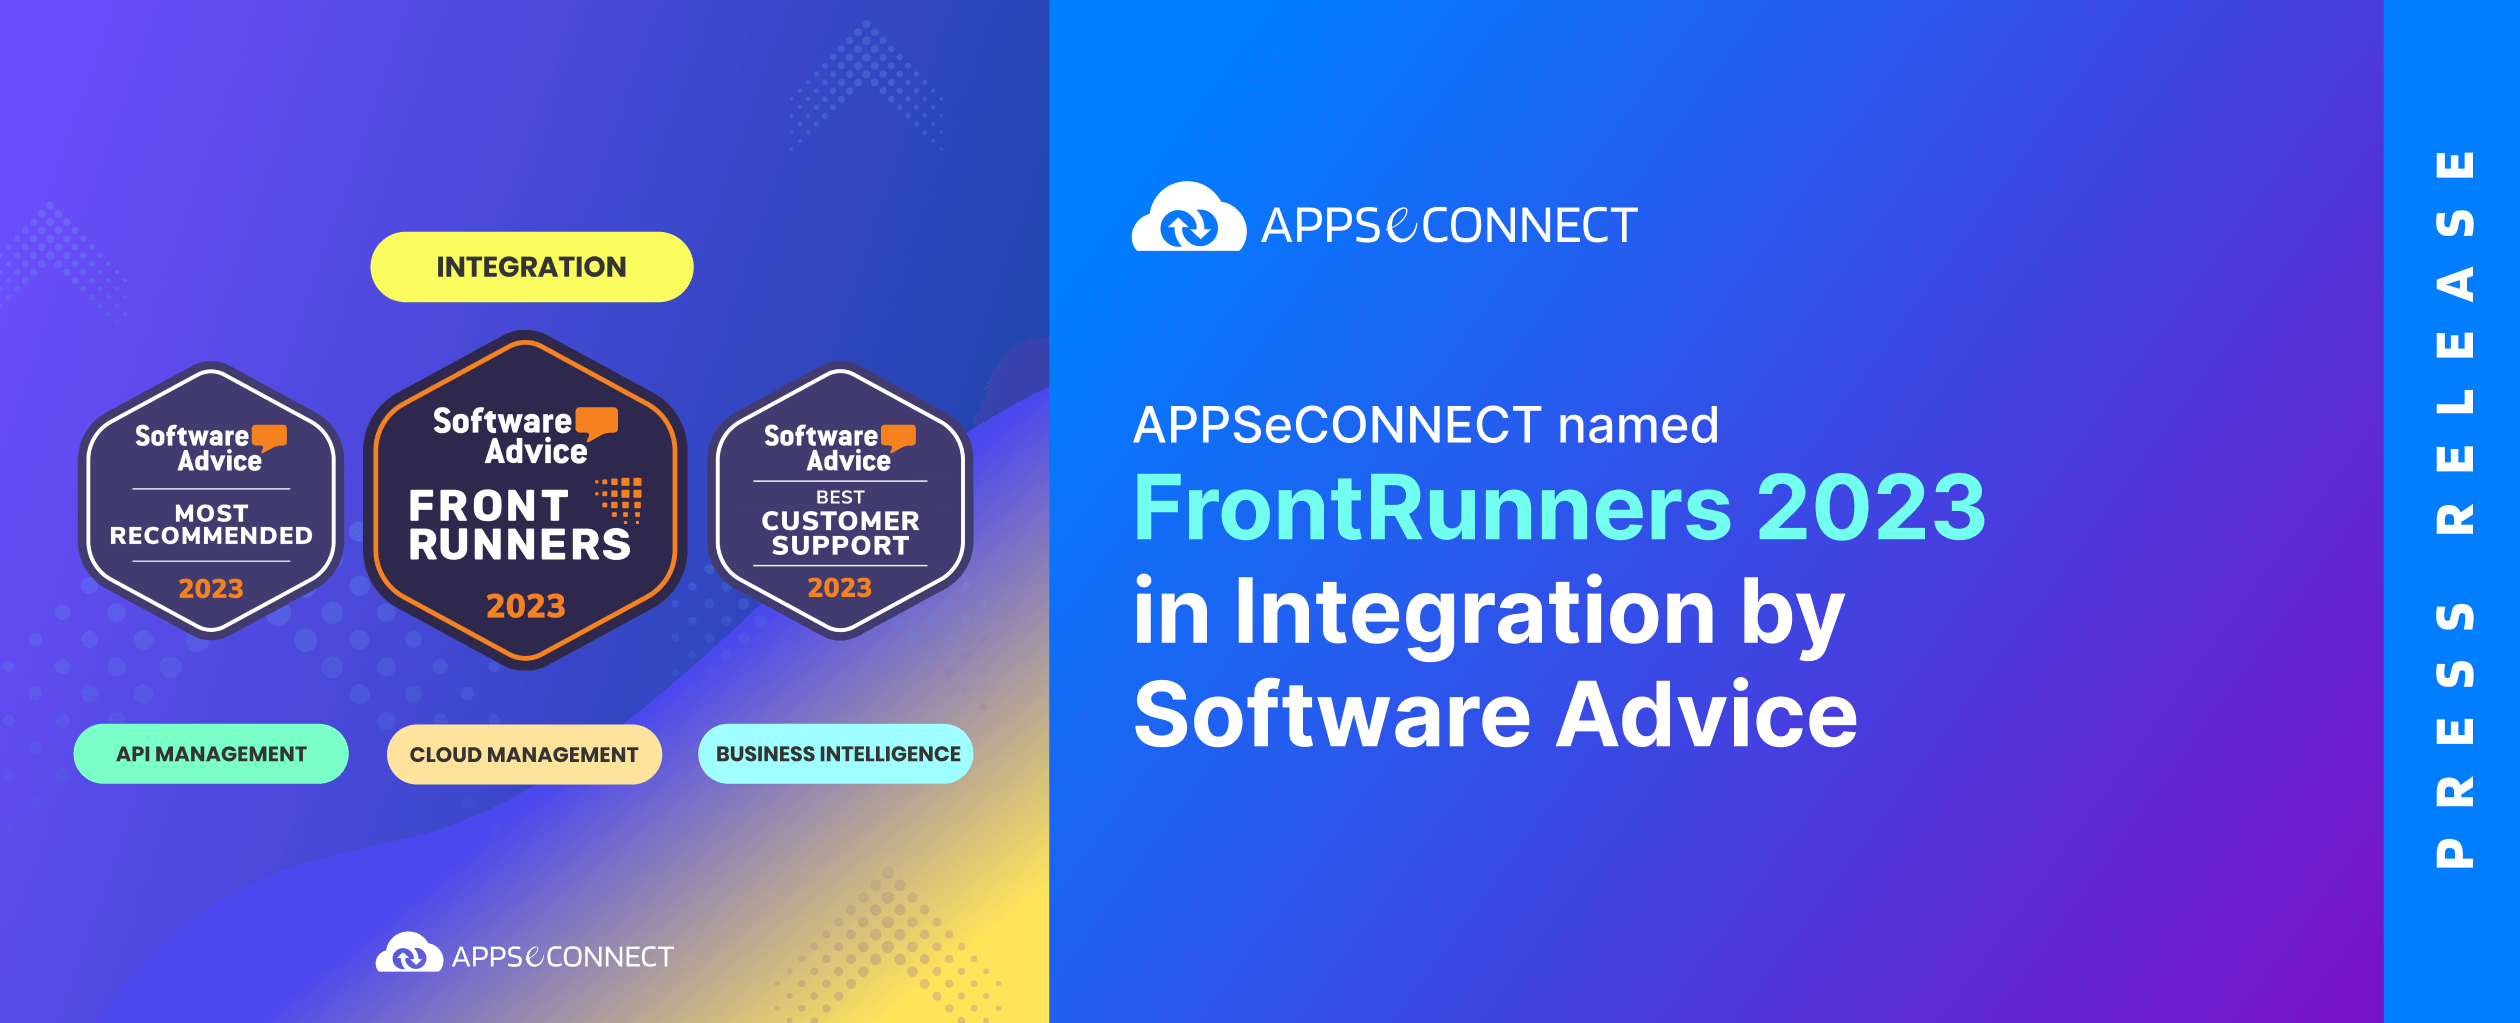 APPSeCONNECT-frontrunners-2023-integration-software-advice